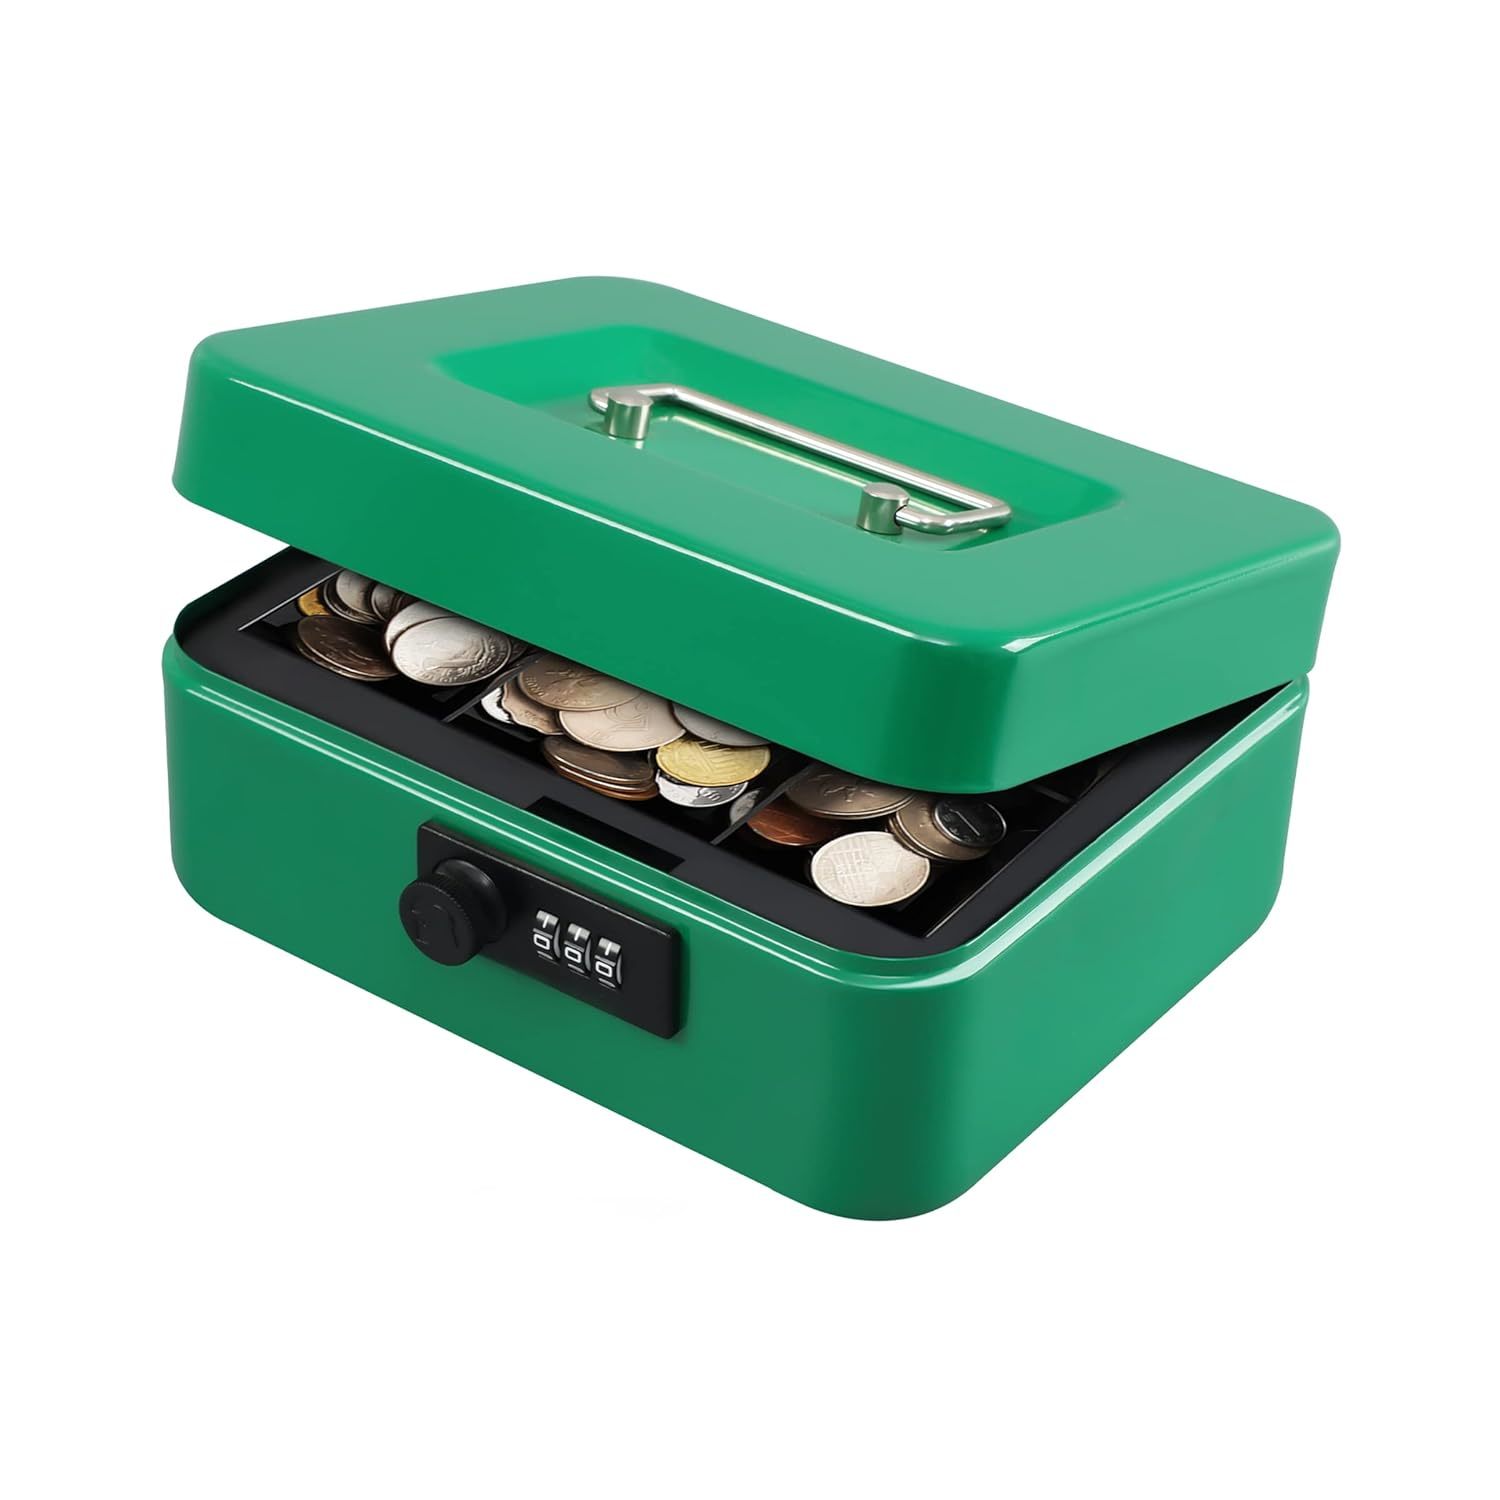 Primary image for Cash Box With Combination Lock,Safe Metal Box For Money,Storage Lock Box With Mo